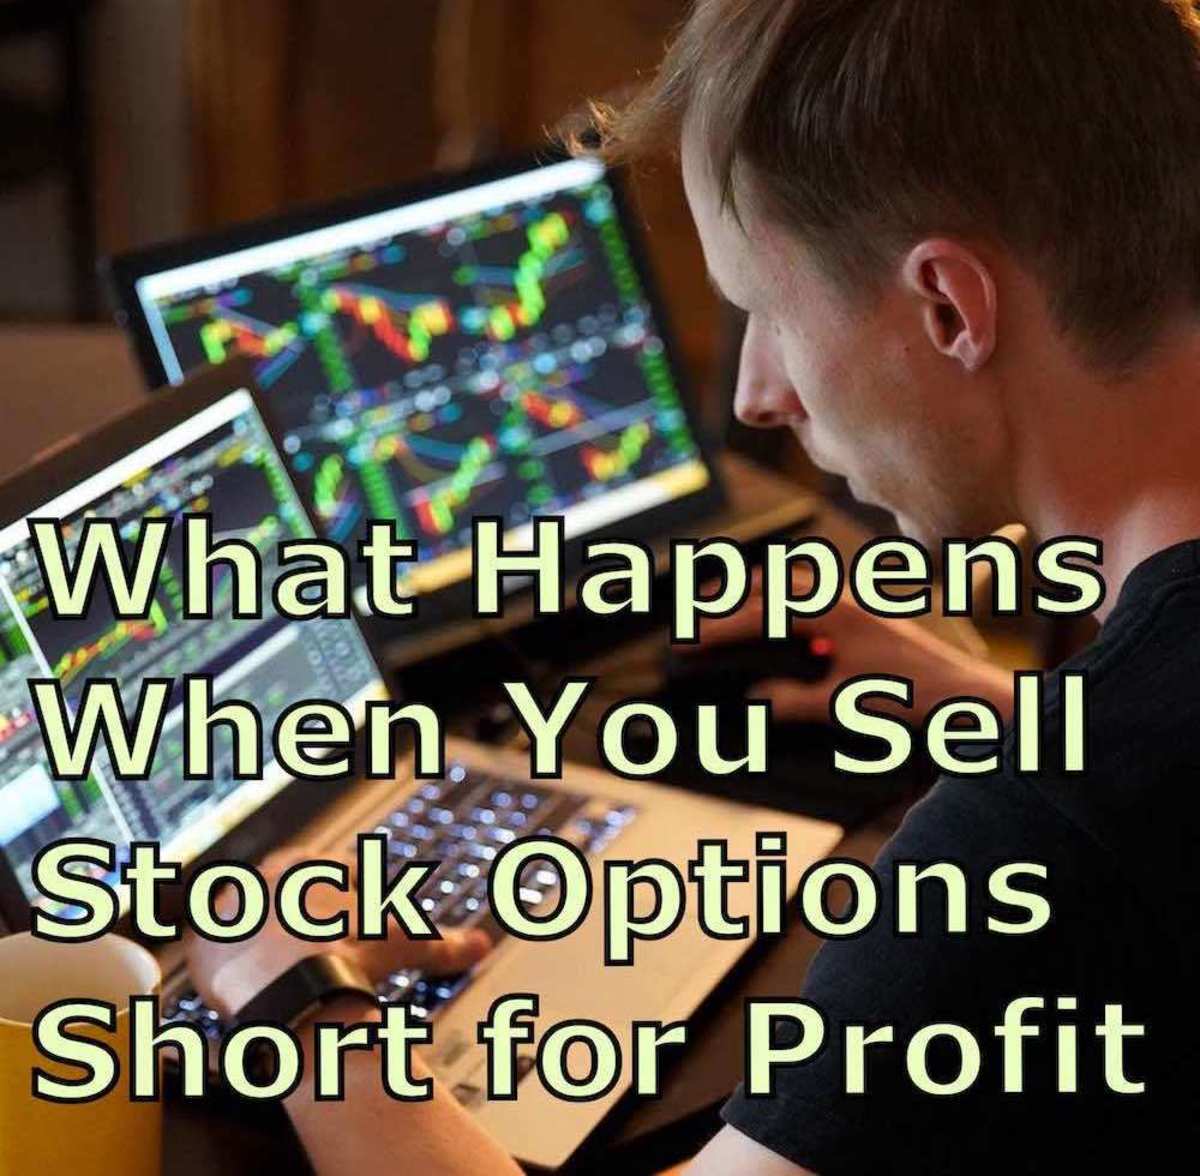 What Happens When You Sell Stock Options Short for Profit?